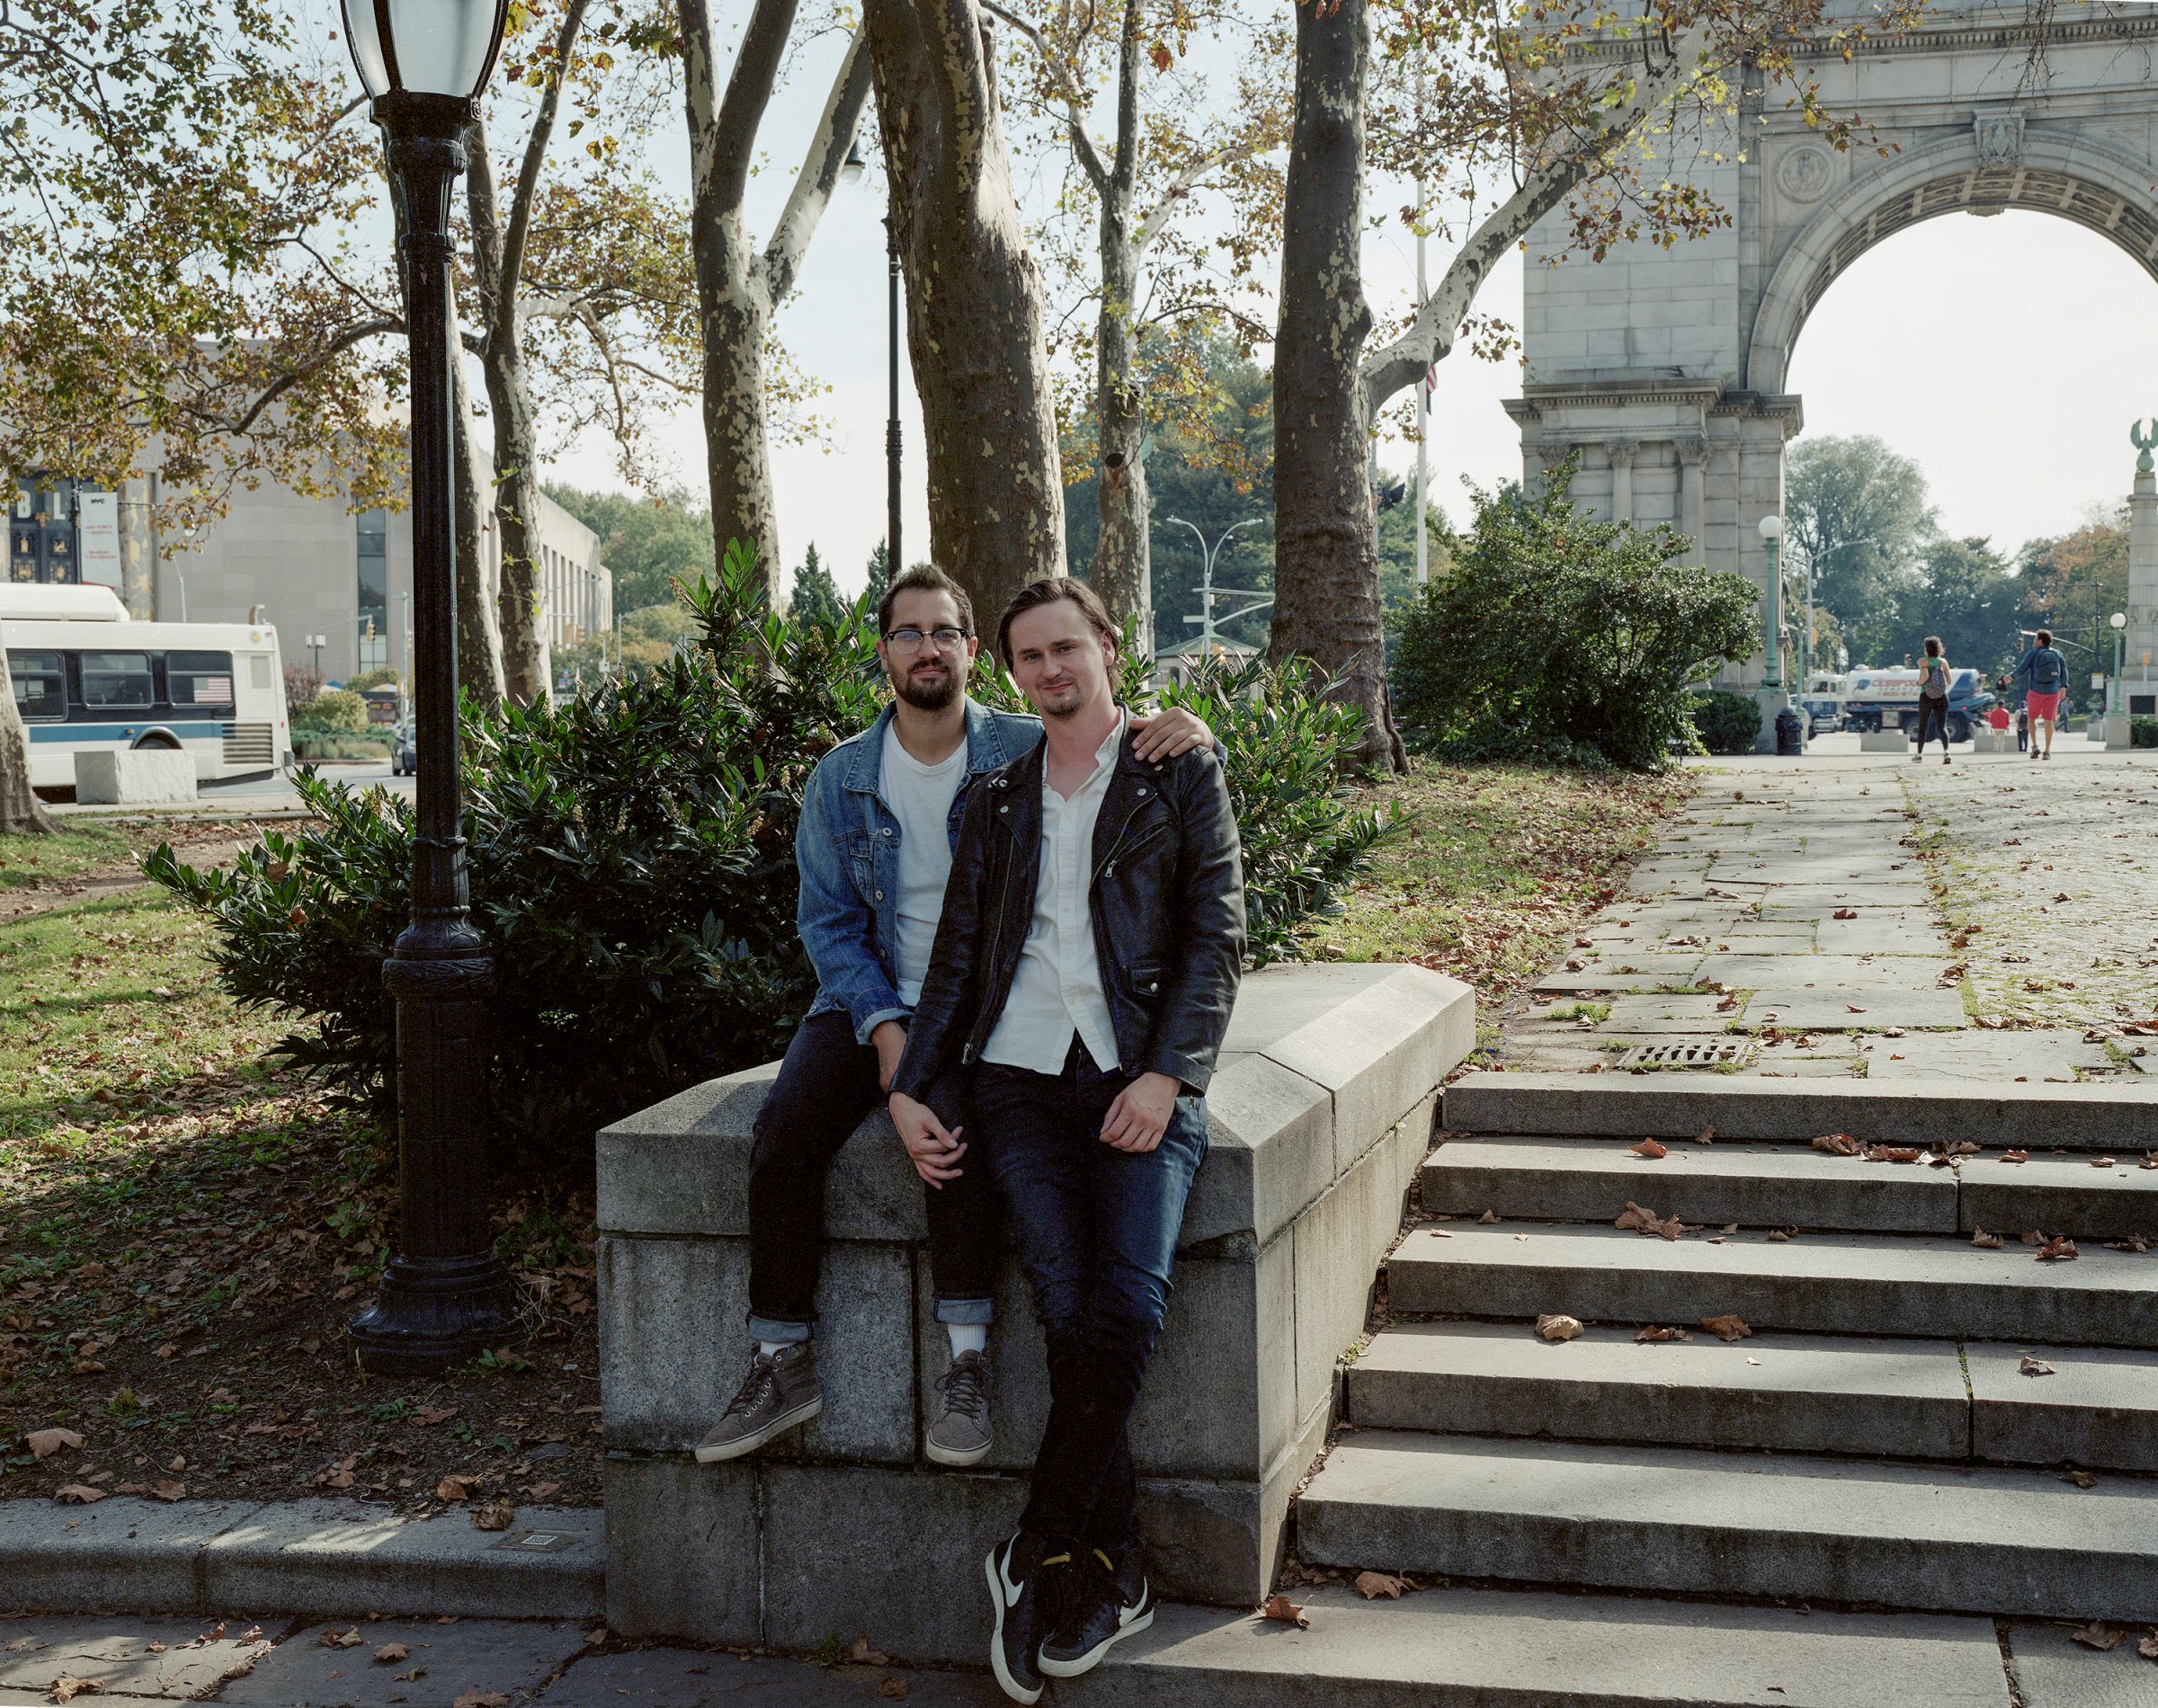 Zach Mazerov and Blake Crist photographed in Prospect Park in Brooklyn in October of 2021.